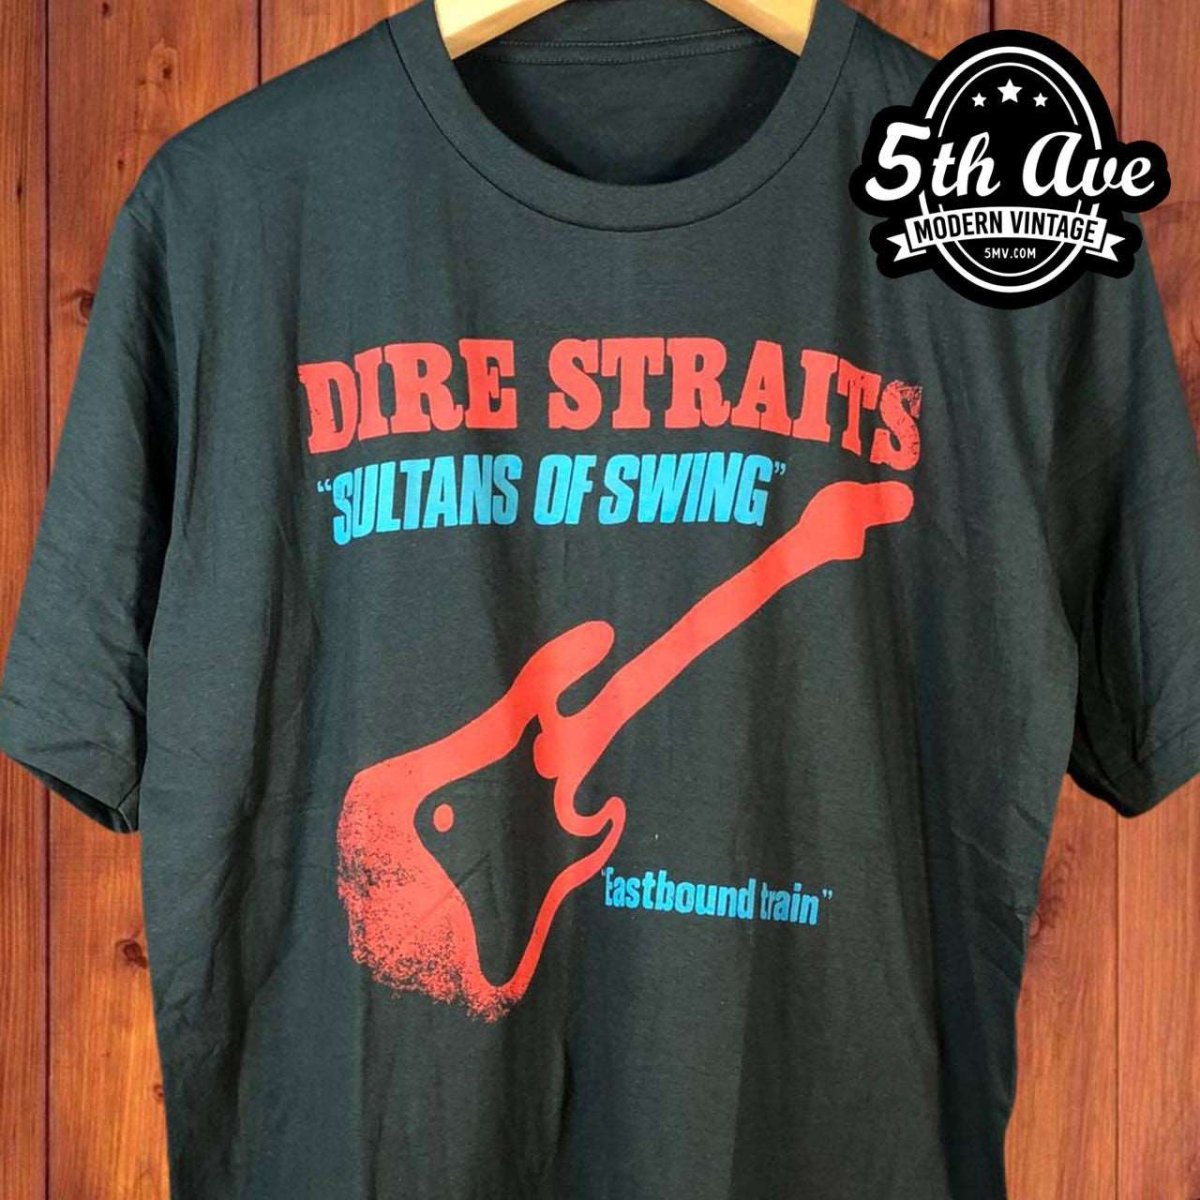 Dire Straits Sultans of Swing Guitar Tribute t shirt - Vintage Band Shirts